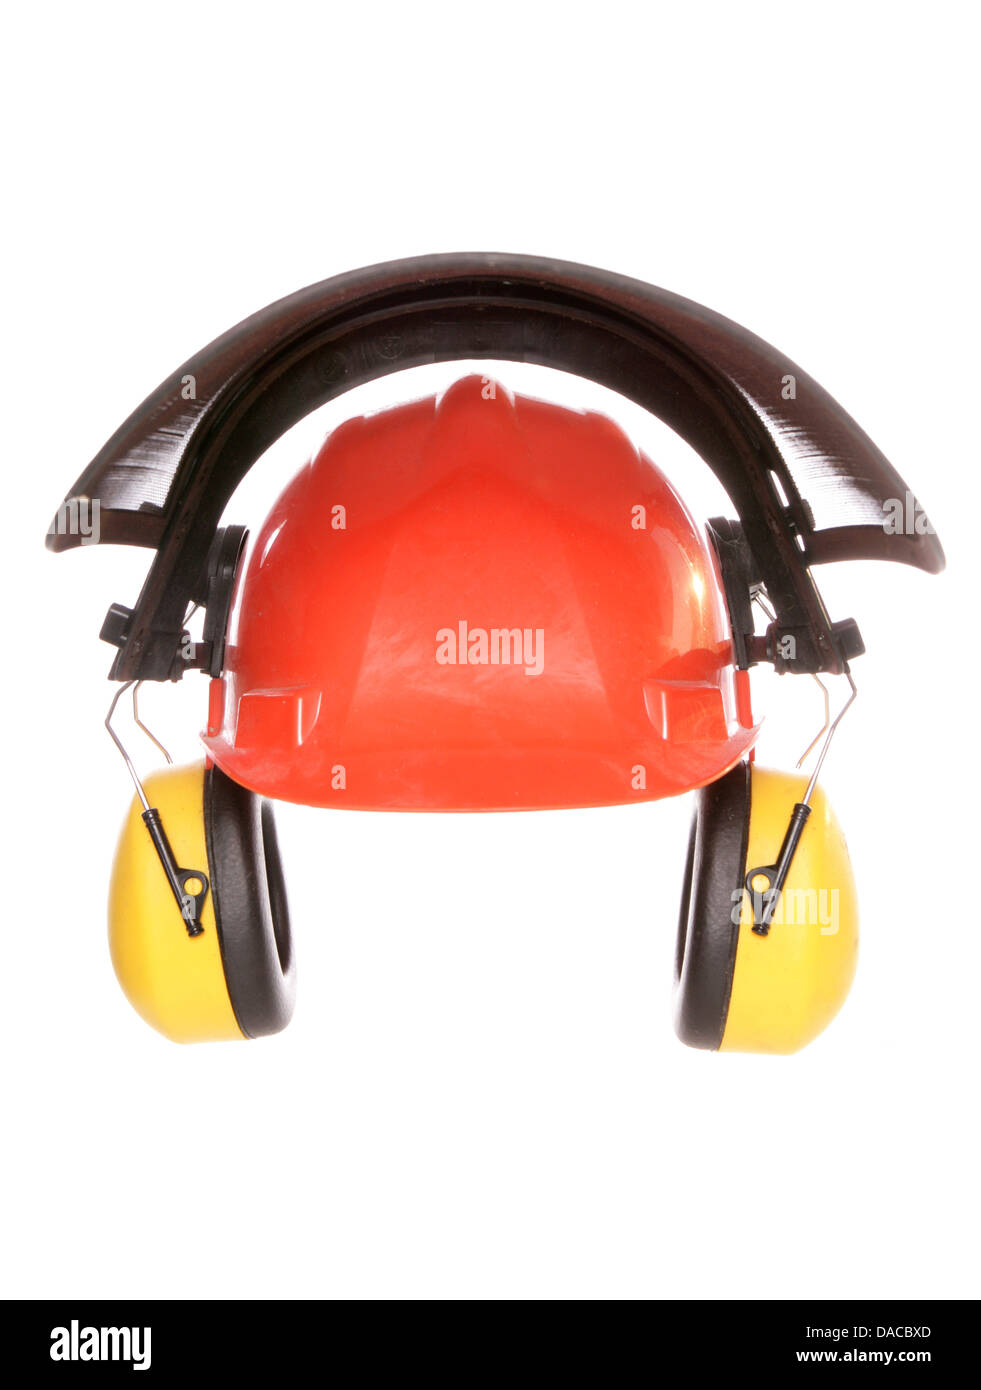 Safety helmet and ear protectors studio cutout Stock Photo